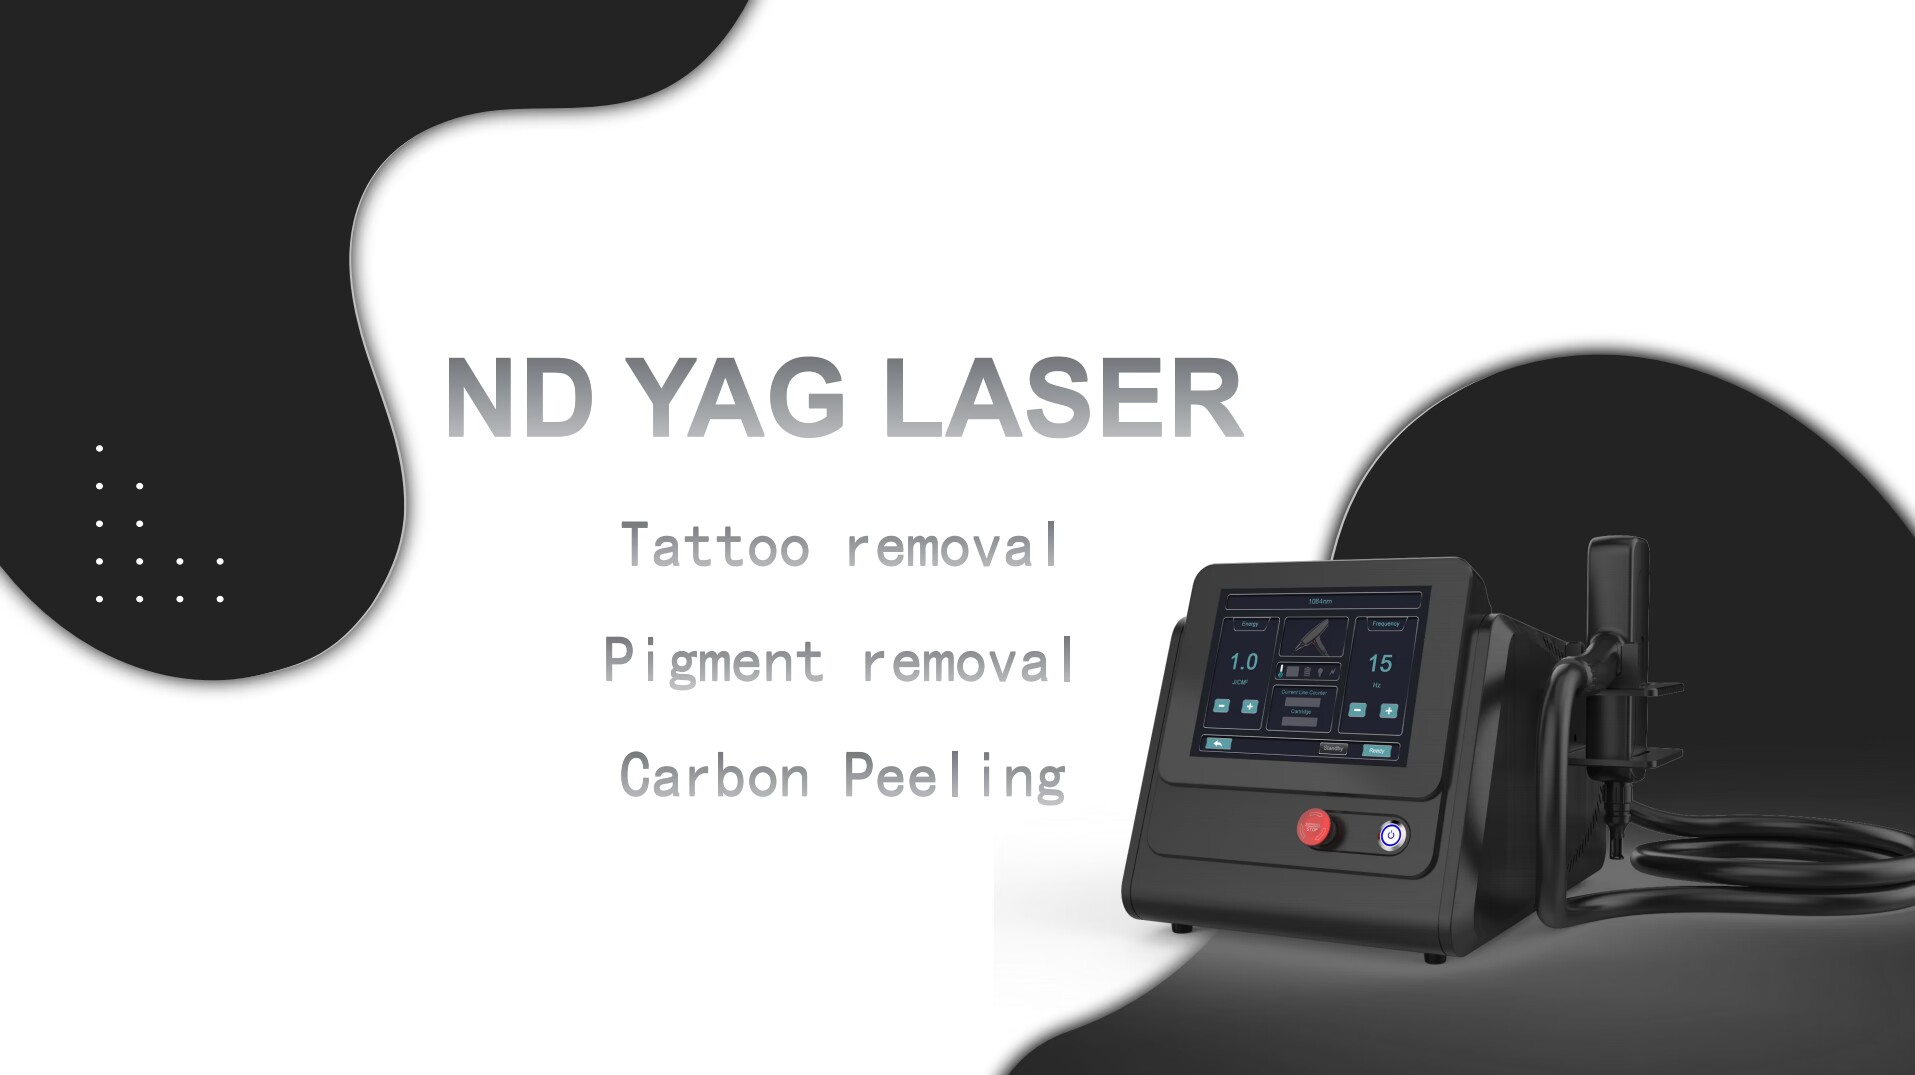 WHY ADD TATTOO REMOVAL TO YOUR CLINIC?